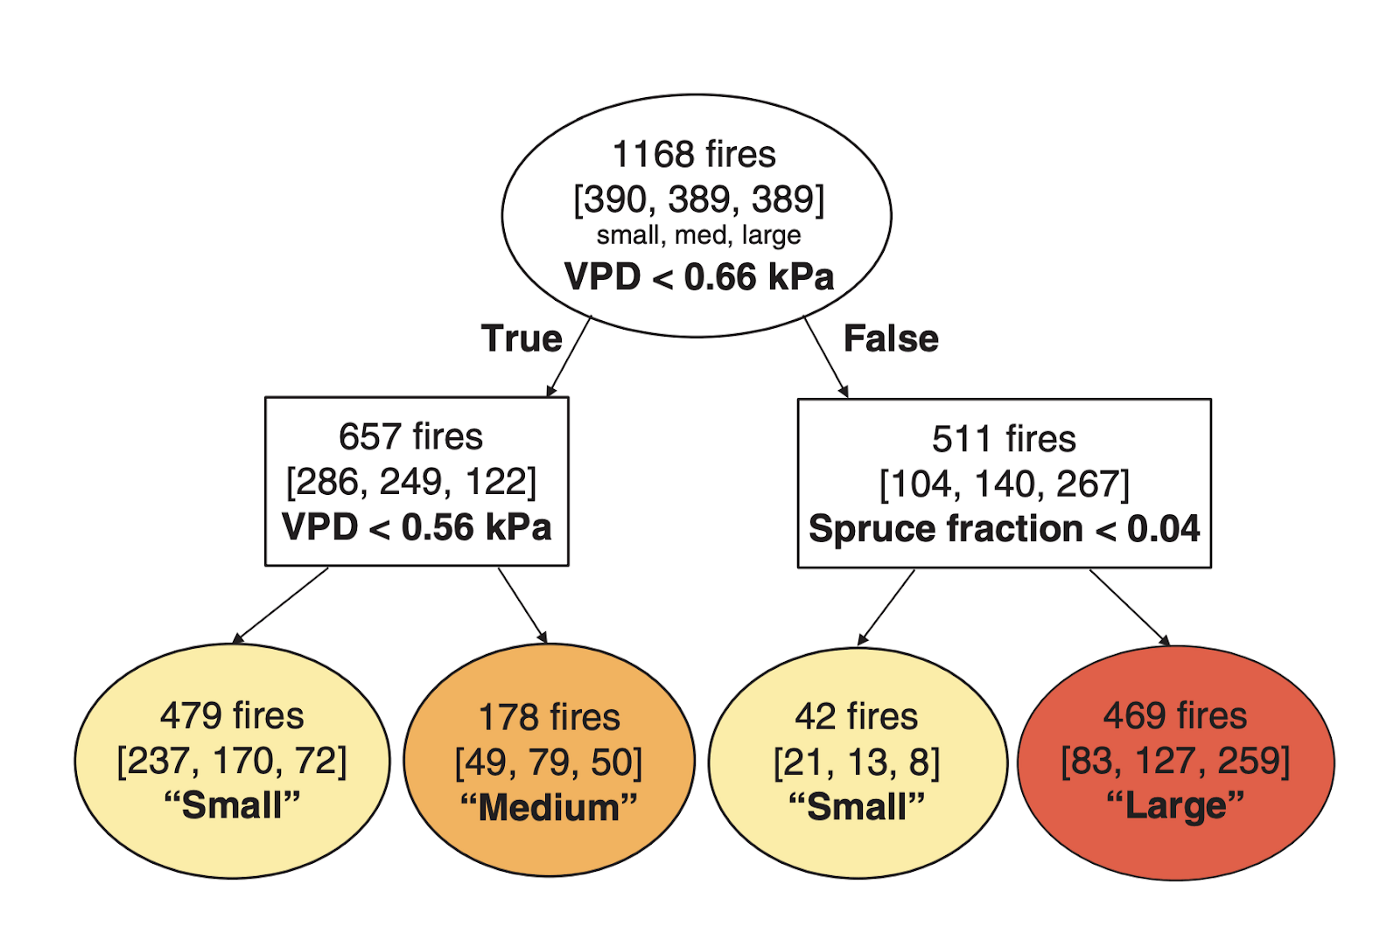 Example of a classification tree with VPD and Spruce fraction as dependent variables.